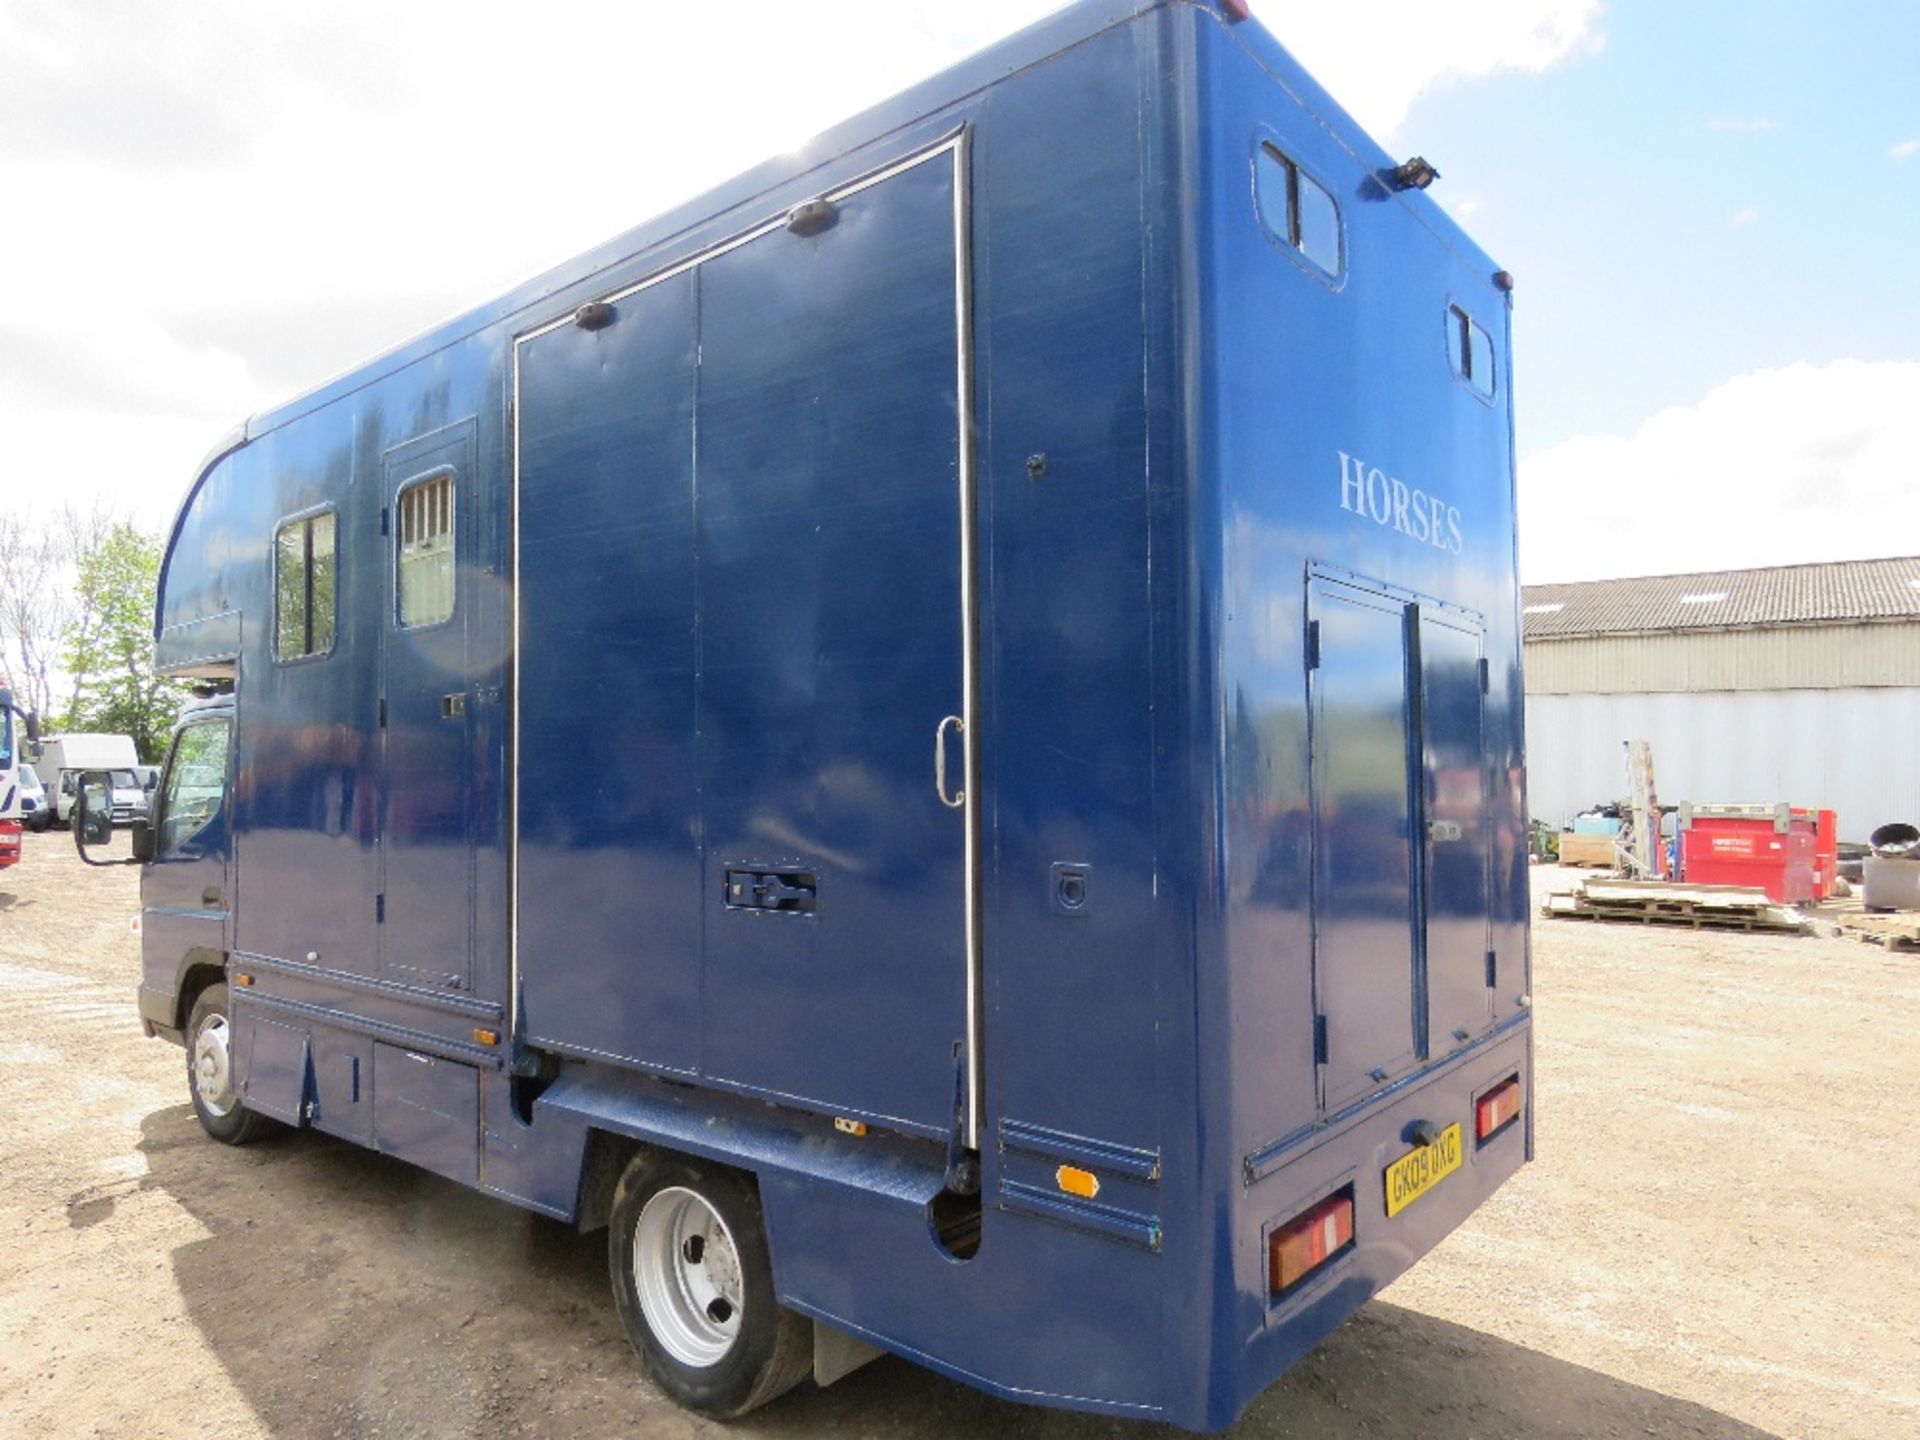 MITSUBISHI CANTER HORSE BOX LORRY REG:GK09 OXG. V5 AND PLATING CERTIFICATE IN OFFICE. MOT EXPIRED. - Bild 6 aus 24